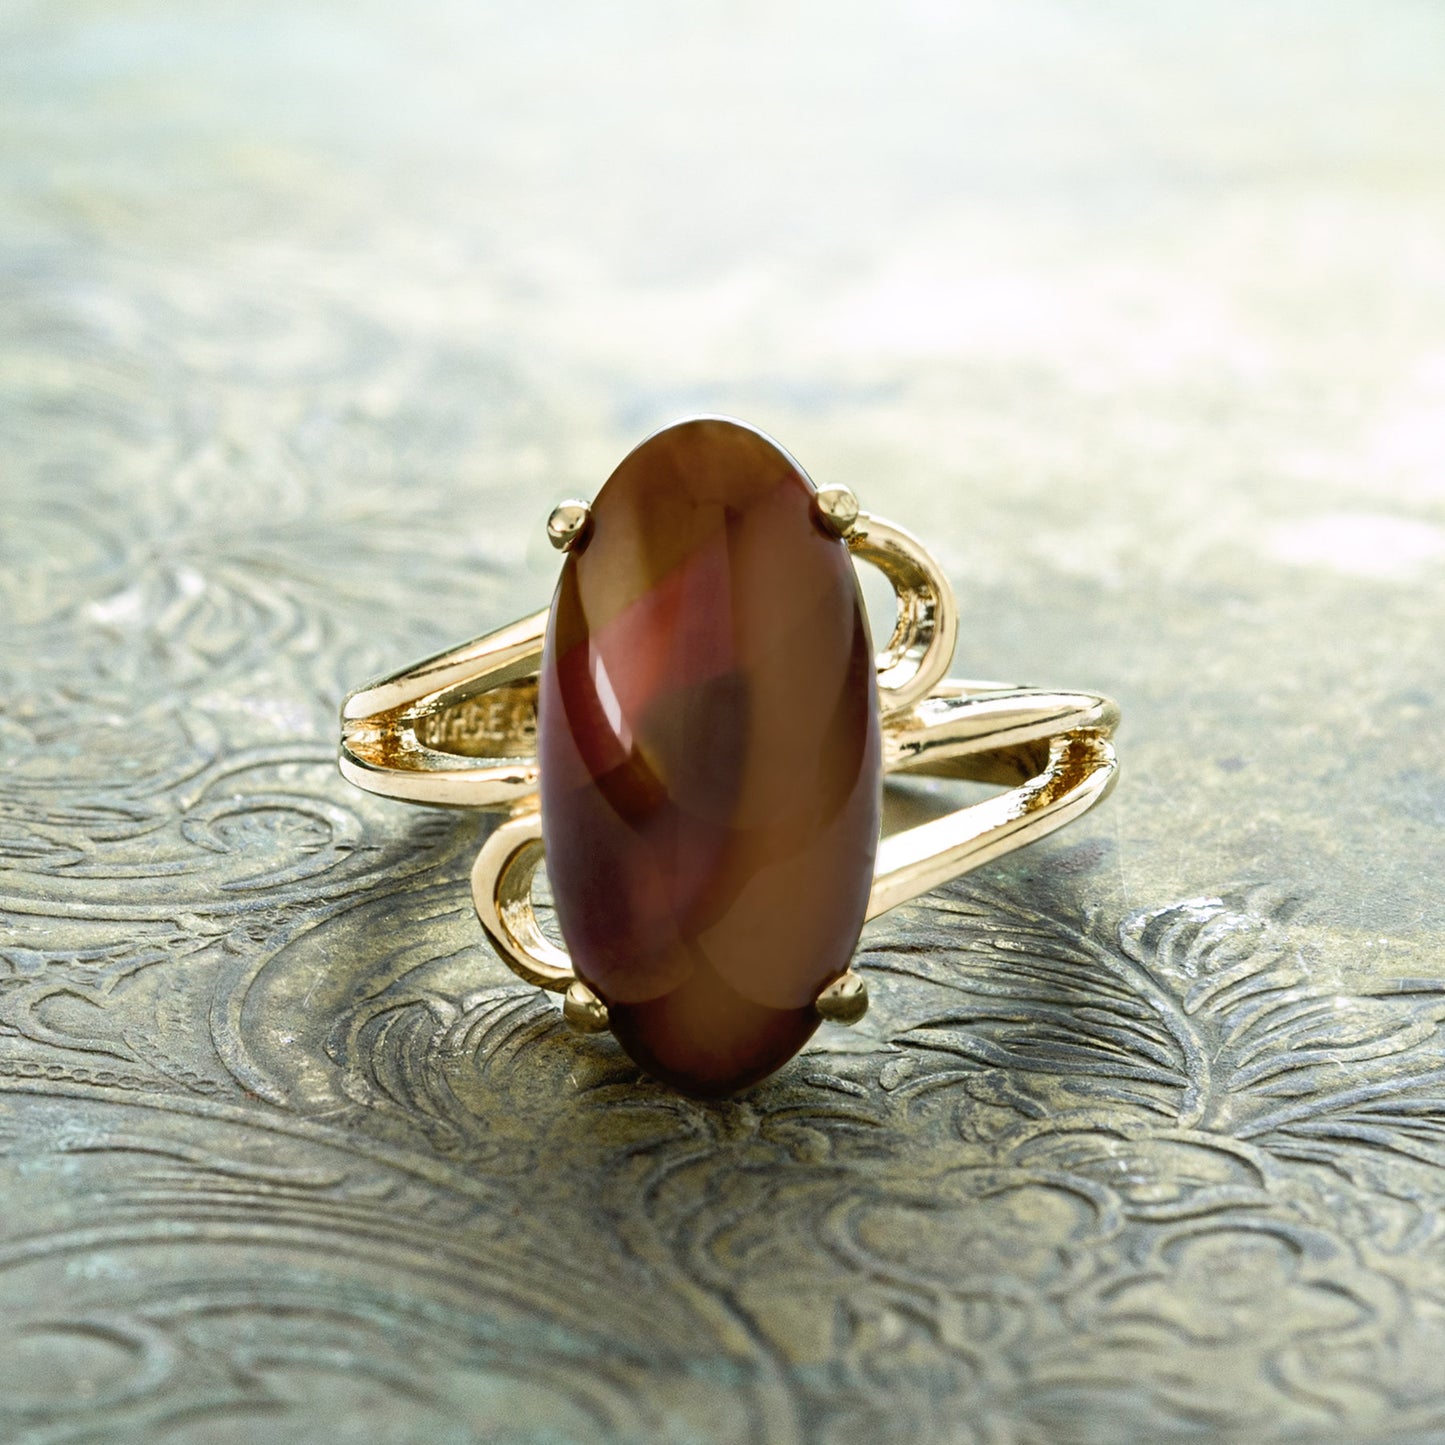 vintage-imitation-brown-coral-gold-plated-cocktail-ring